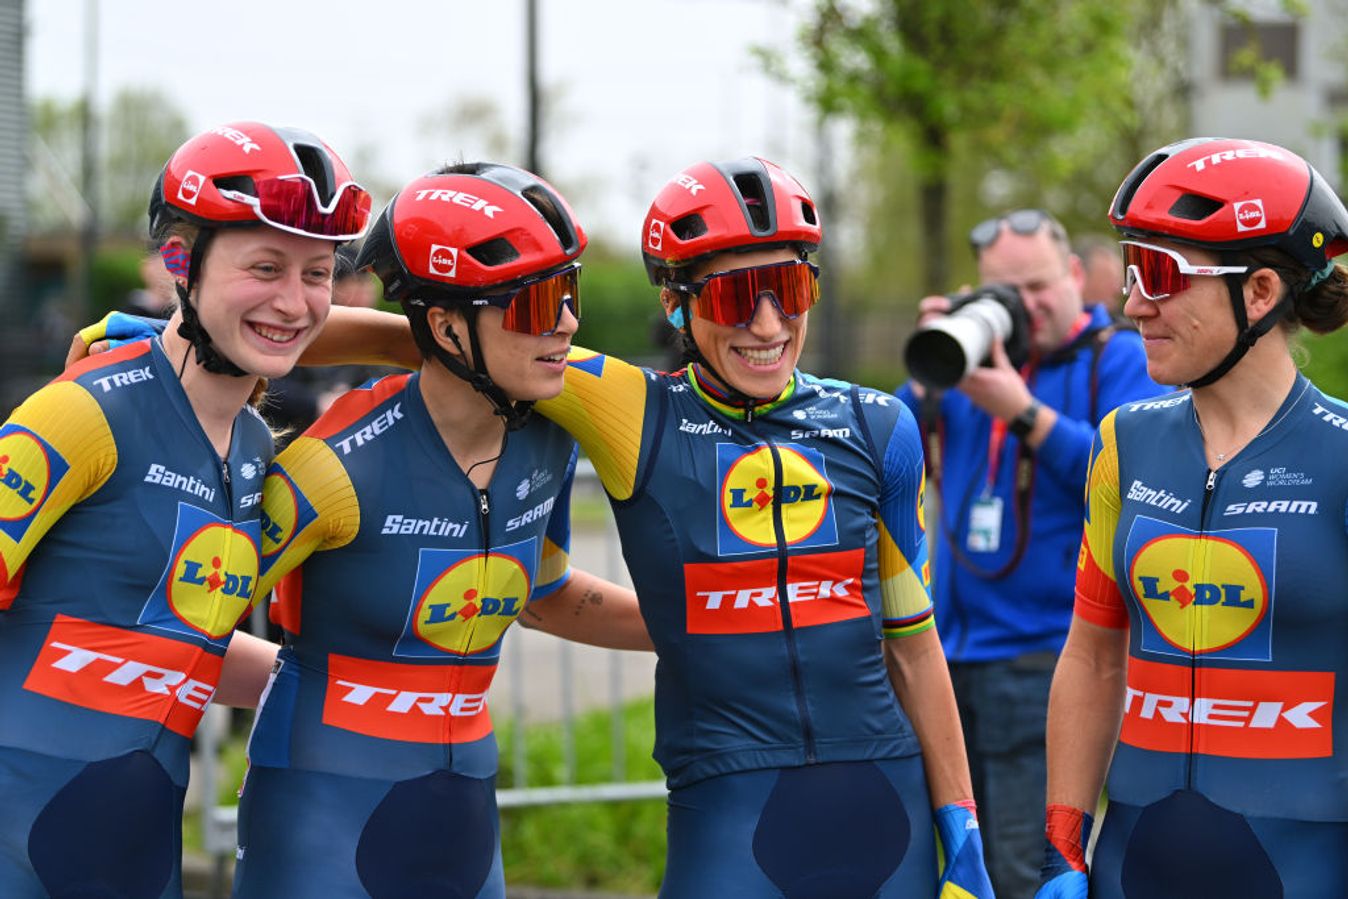 Elynor Backstedt, Ilaria Sanguineti, Elisa Balsamo and Lauretta Hanson look relaxed ahead of the race